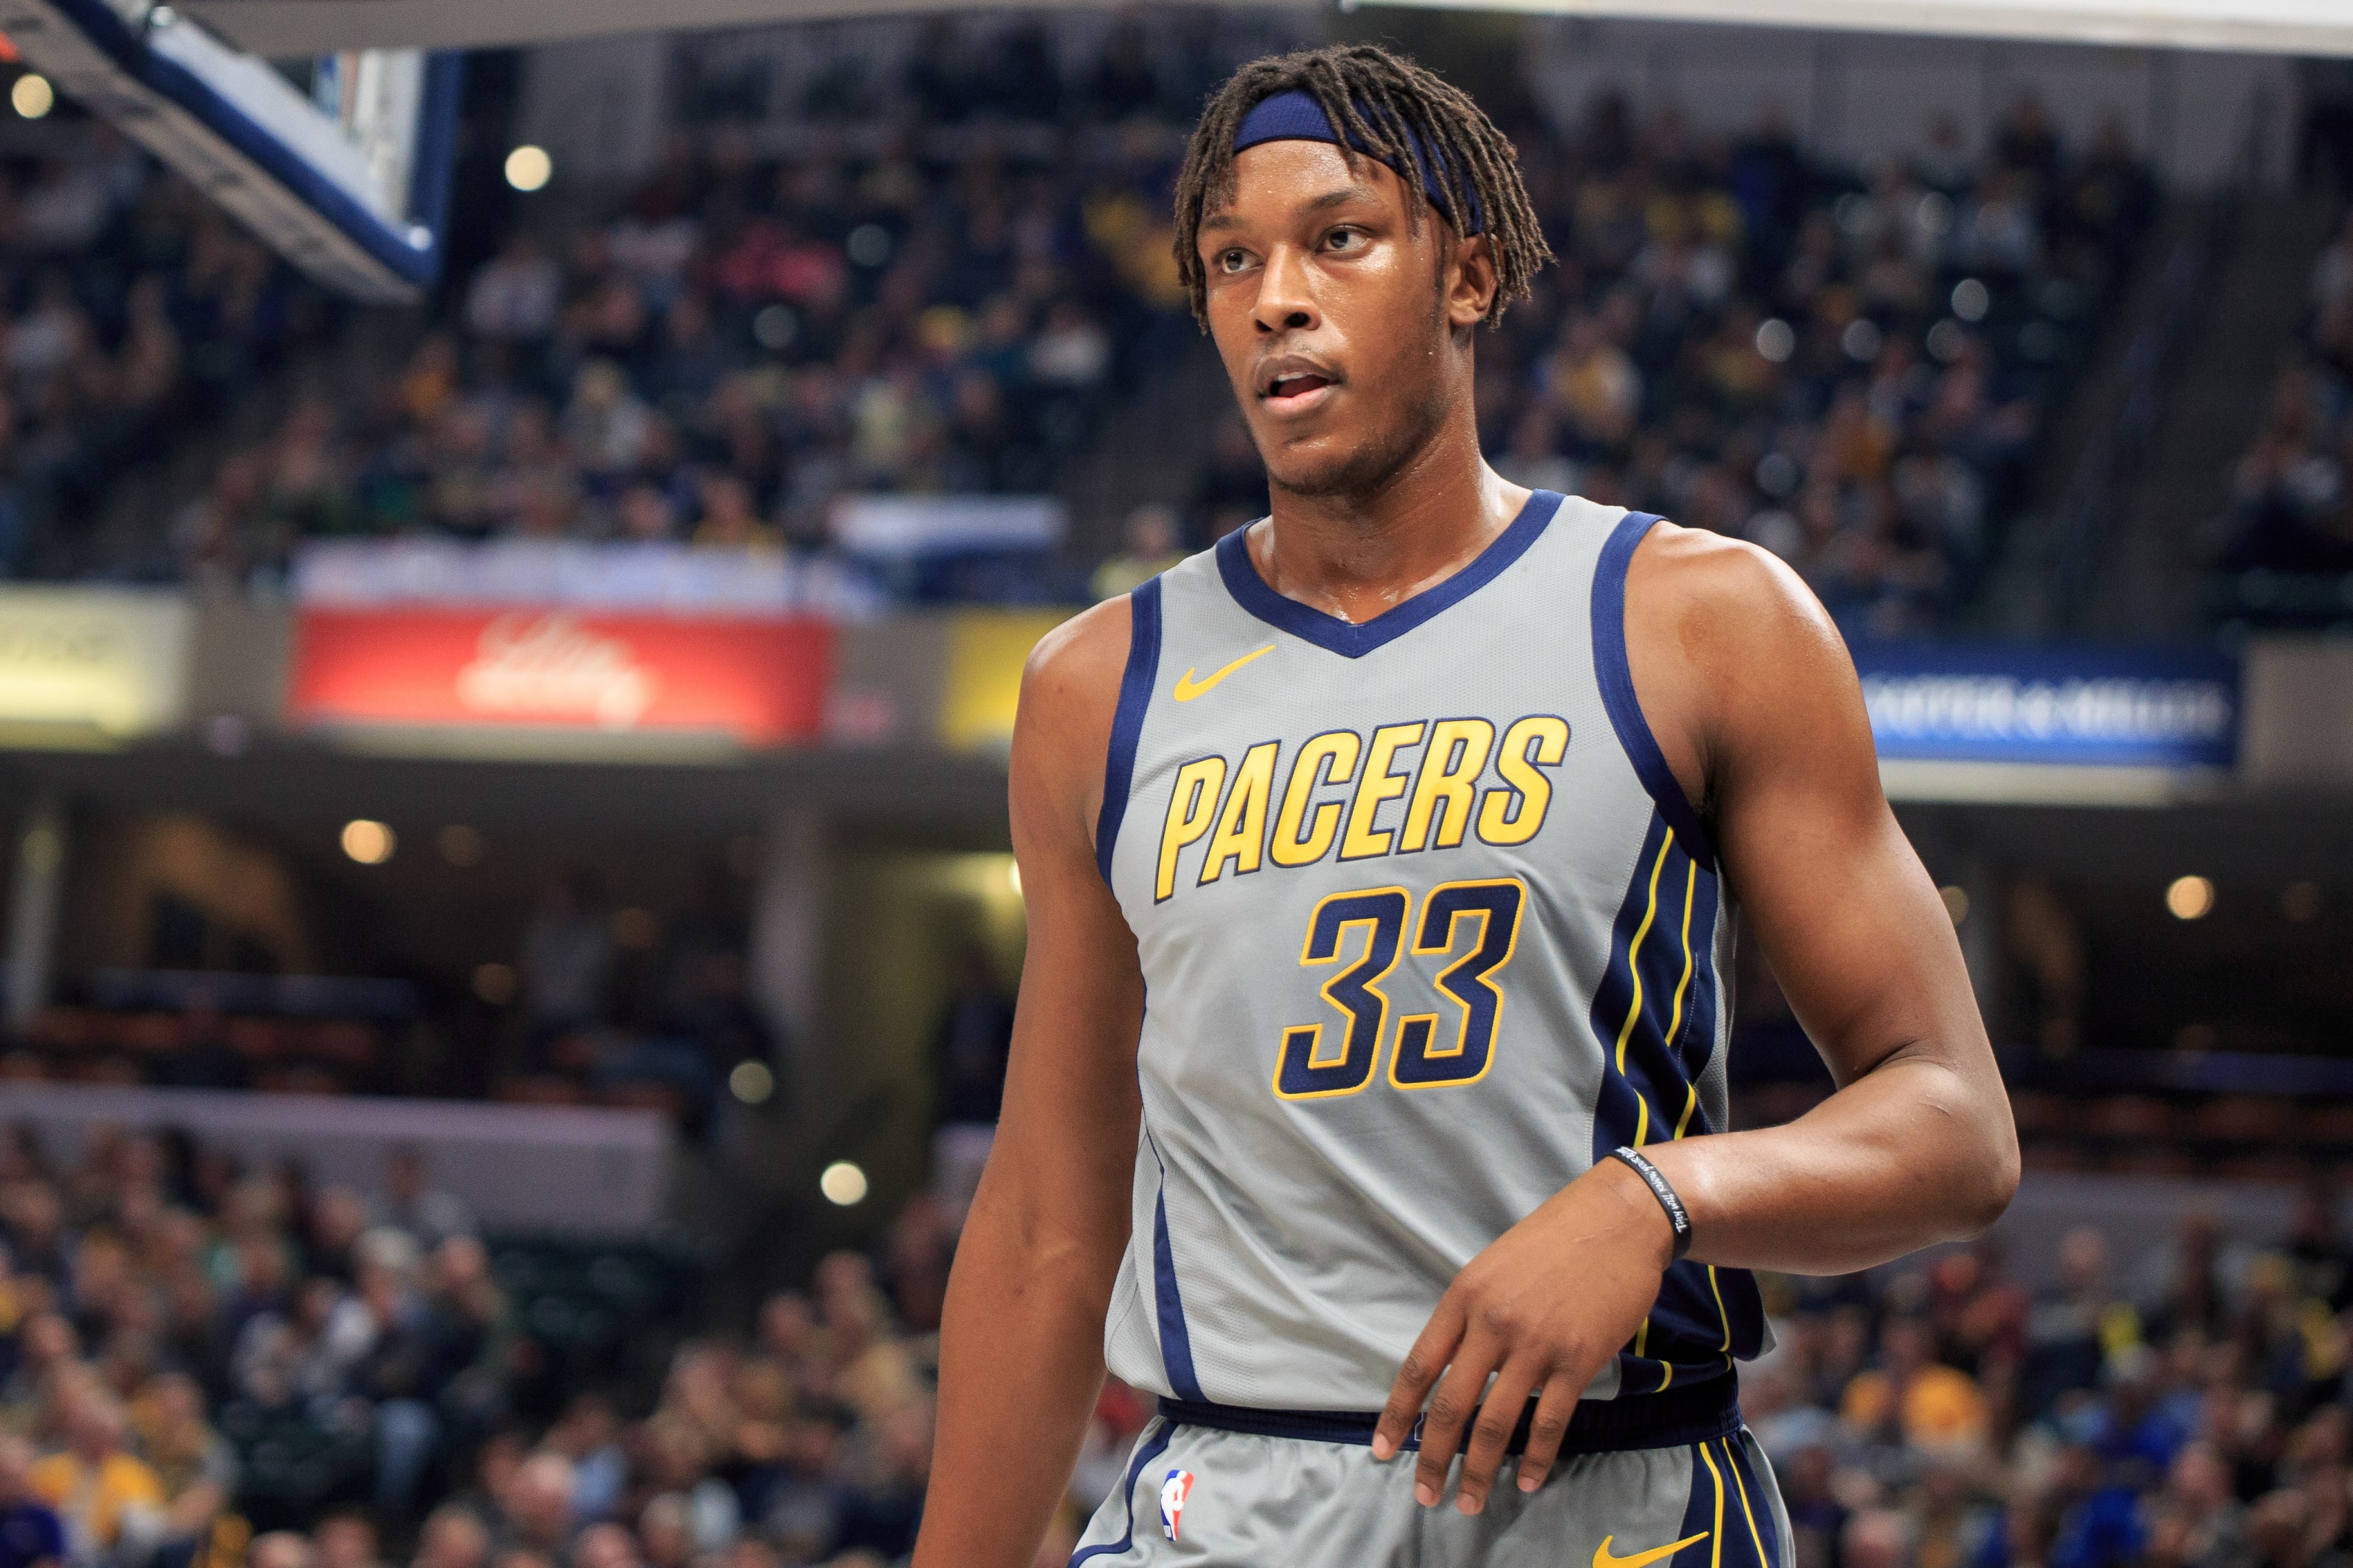 2015 NBA Draft: Indiana Pacers Select PF/C Myles Turner